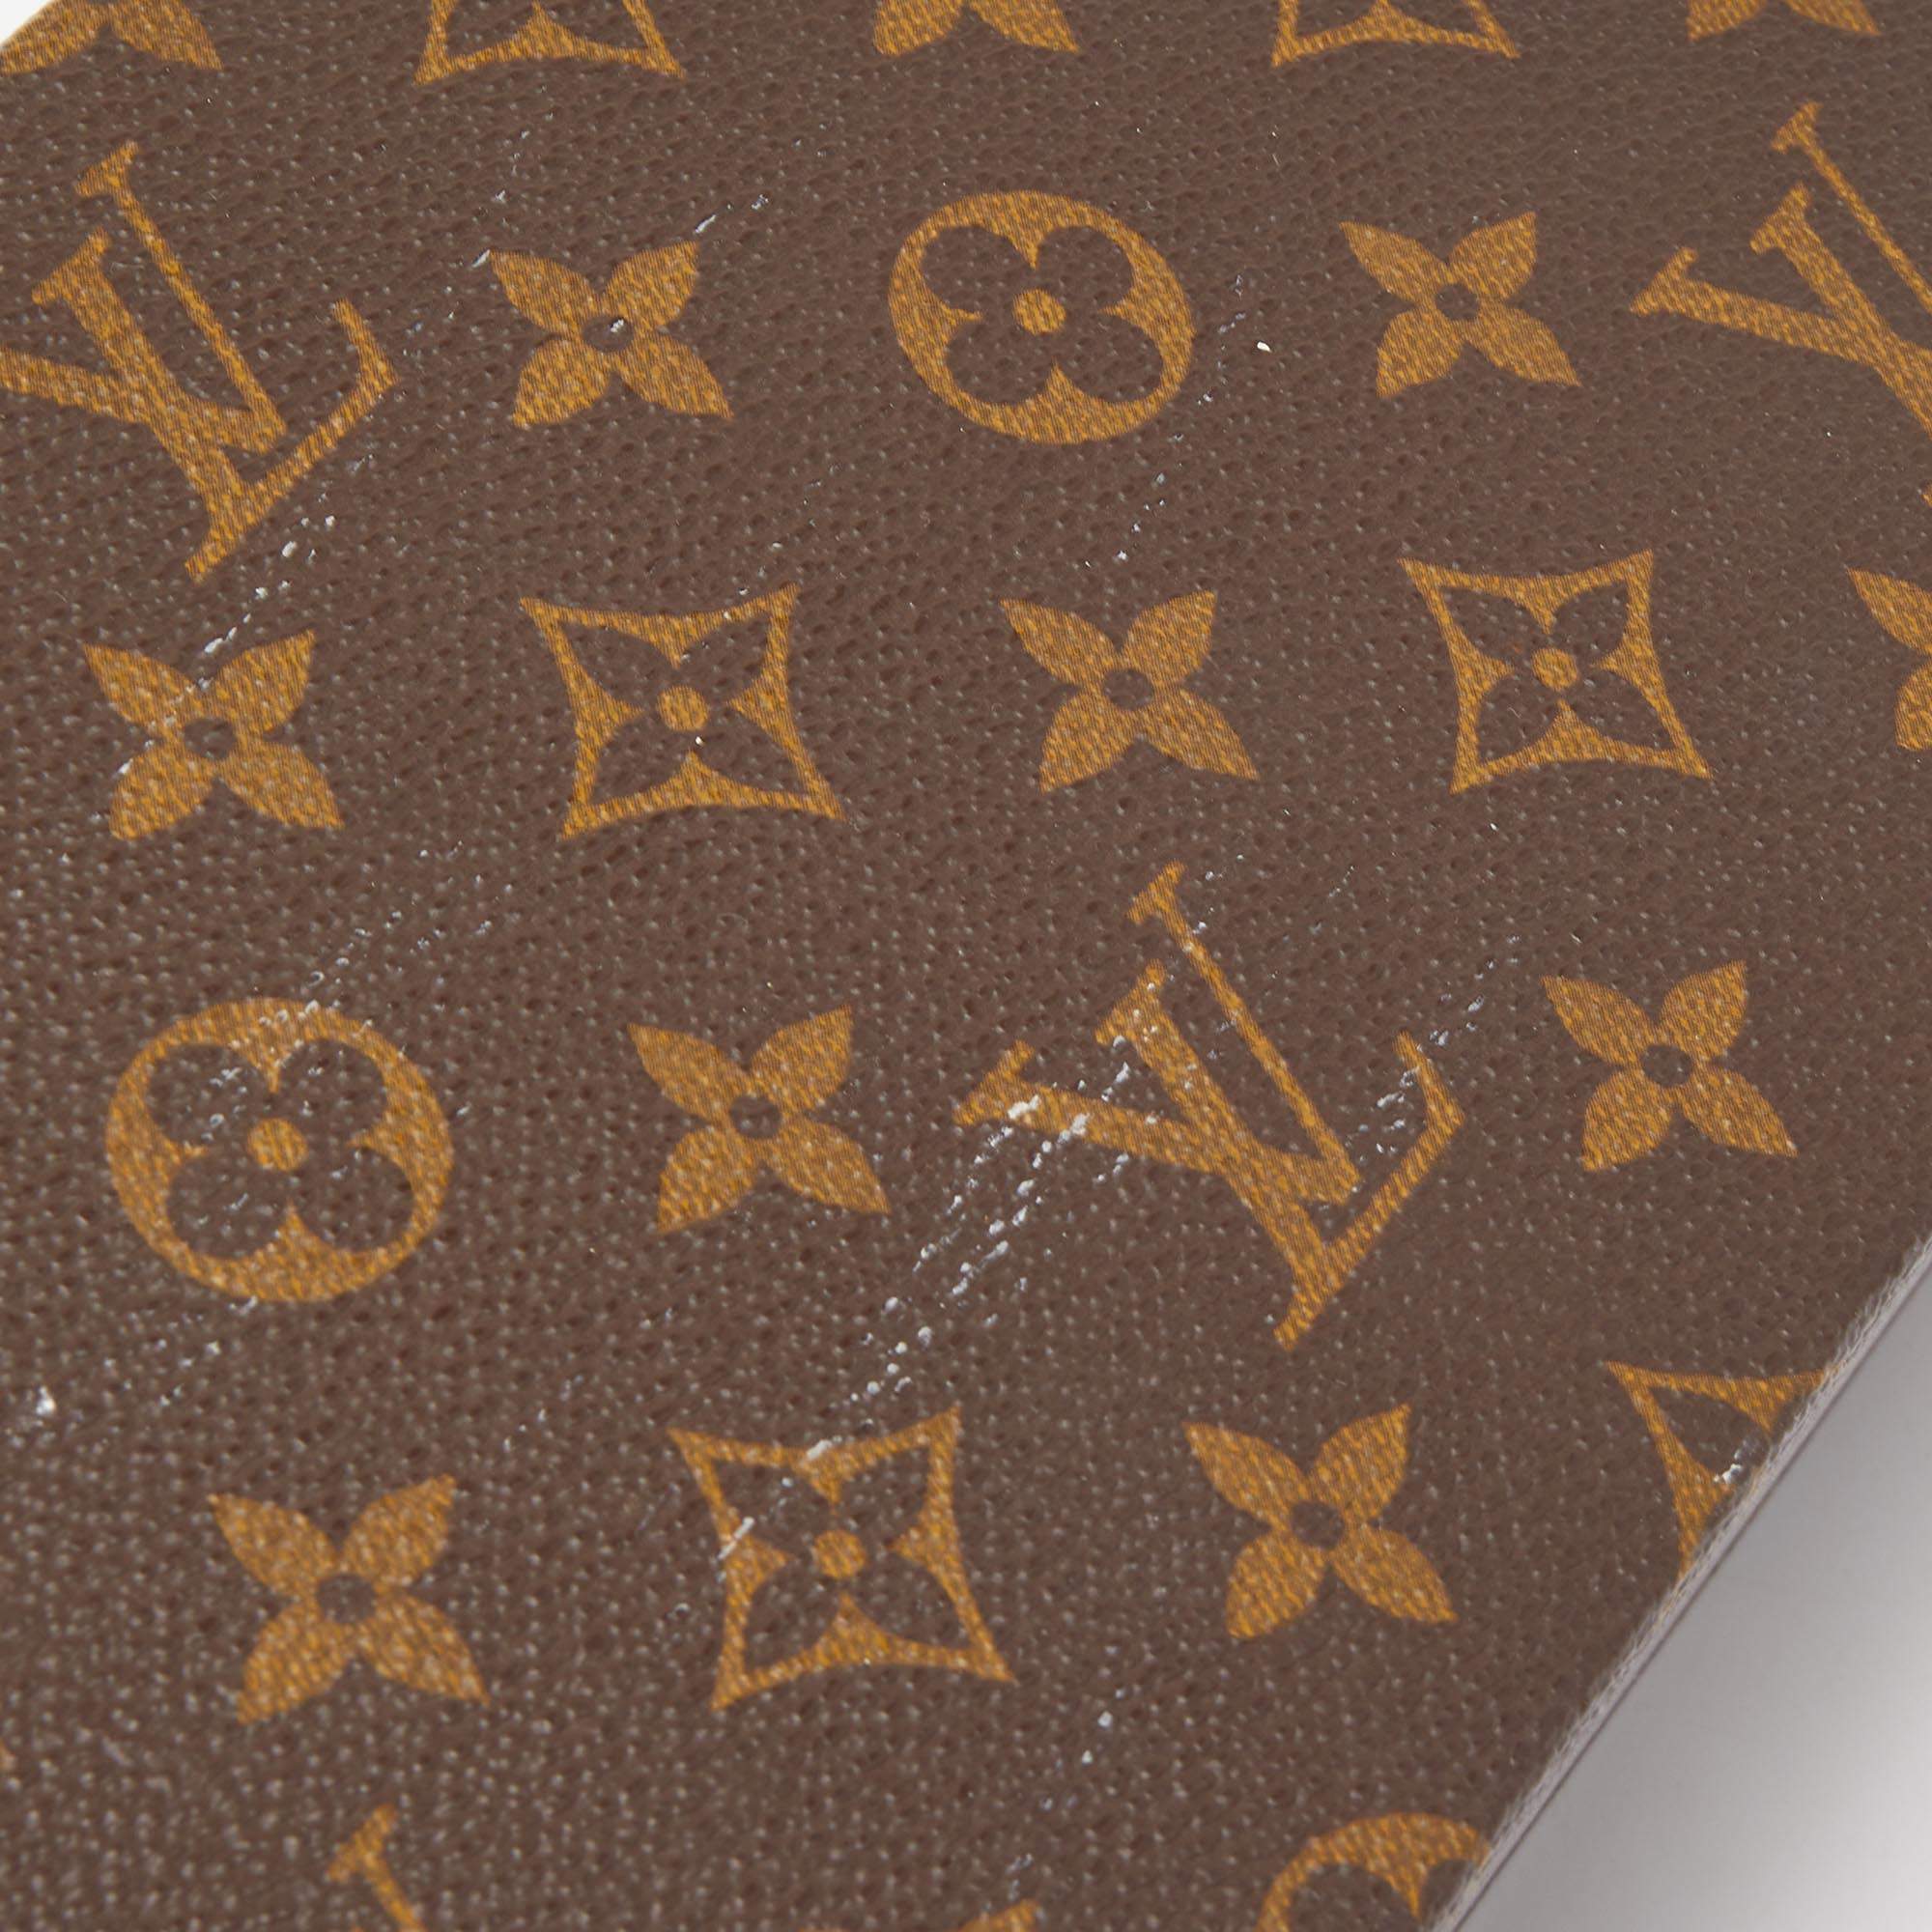 Monogram Boite A Tout Jewelry Hard Case, Louis Vuitton (Lot 136 - Upcoming:  The Important Spring Auction, Saturday, March 14thMar 14, 2020, 10:00am)